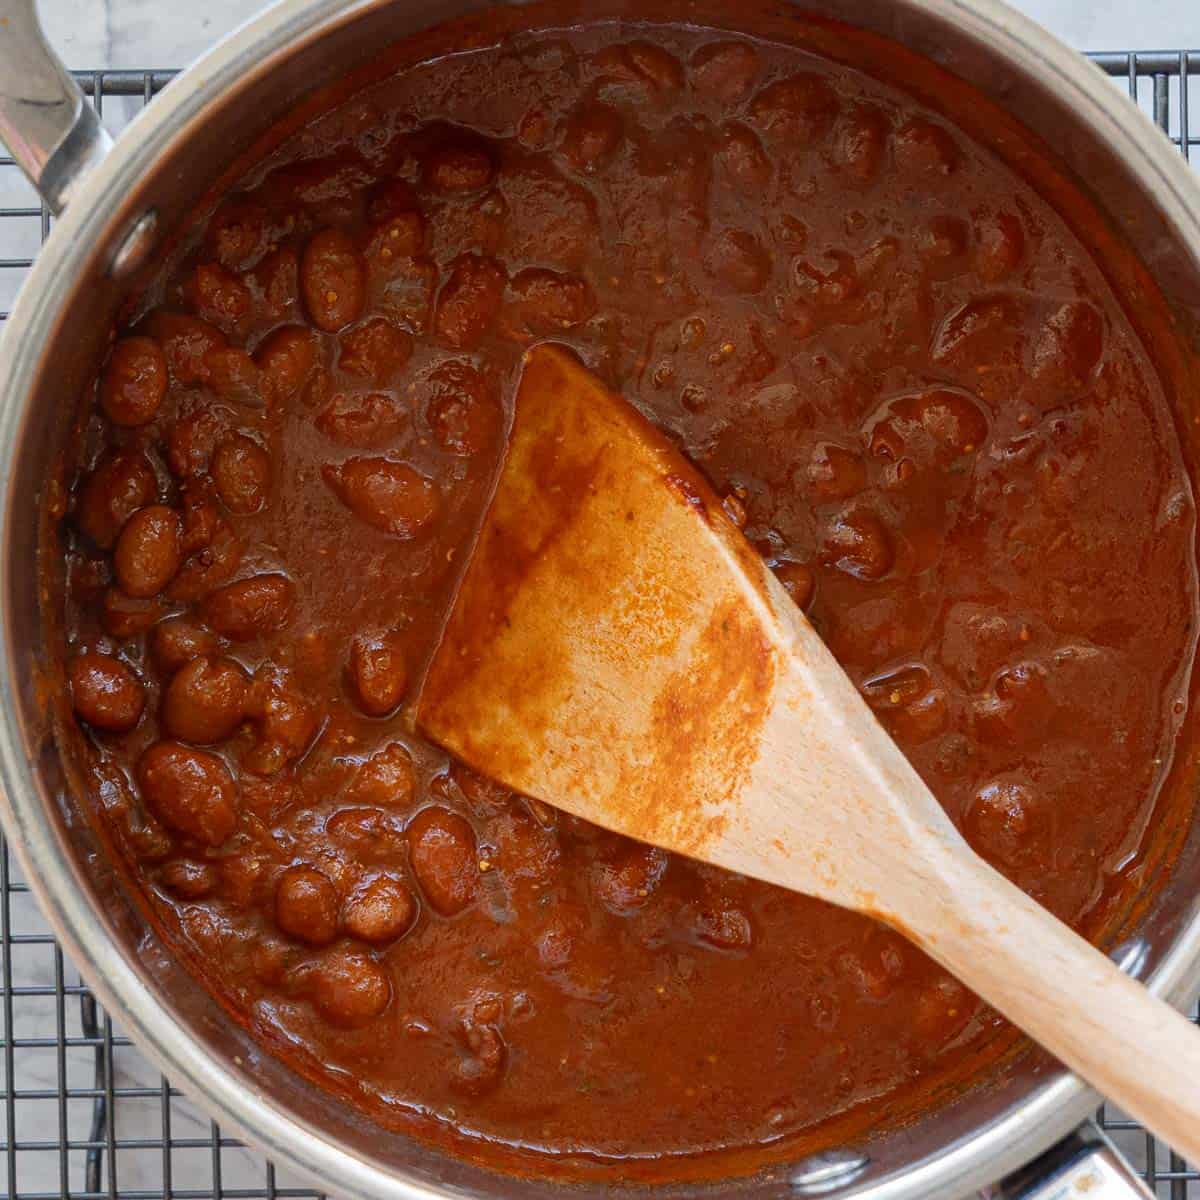 A saucepan of beans in a rich dark red glossy sauce.